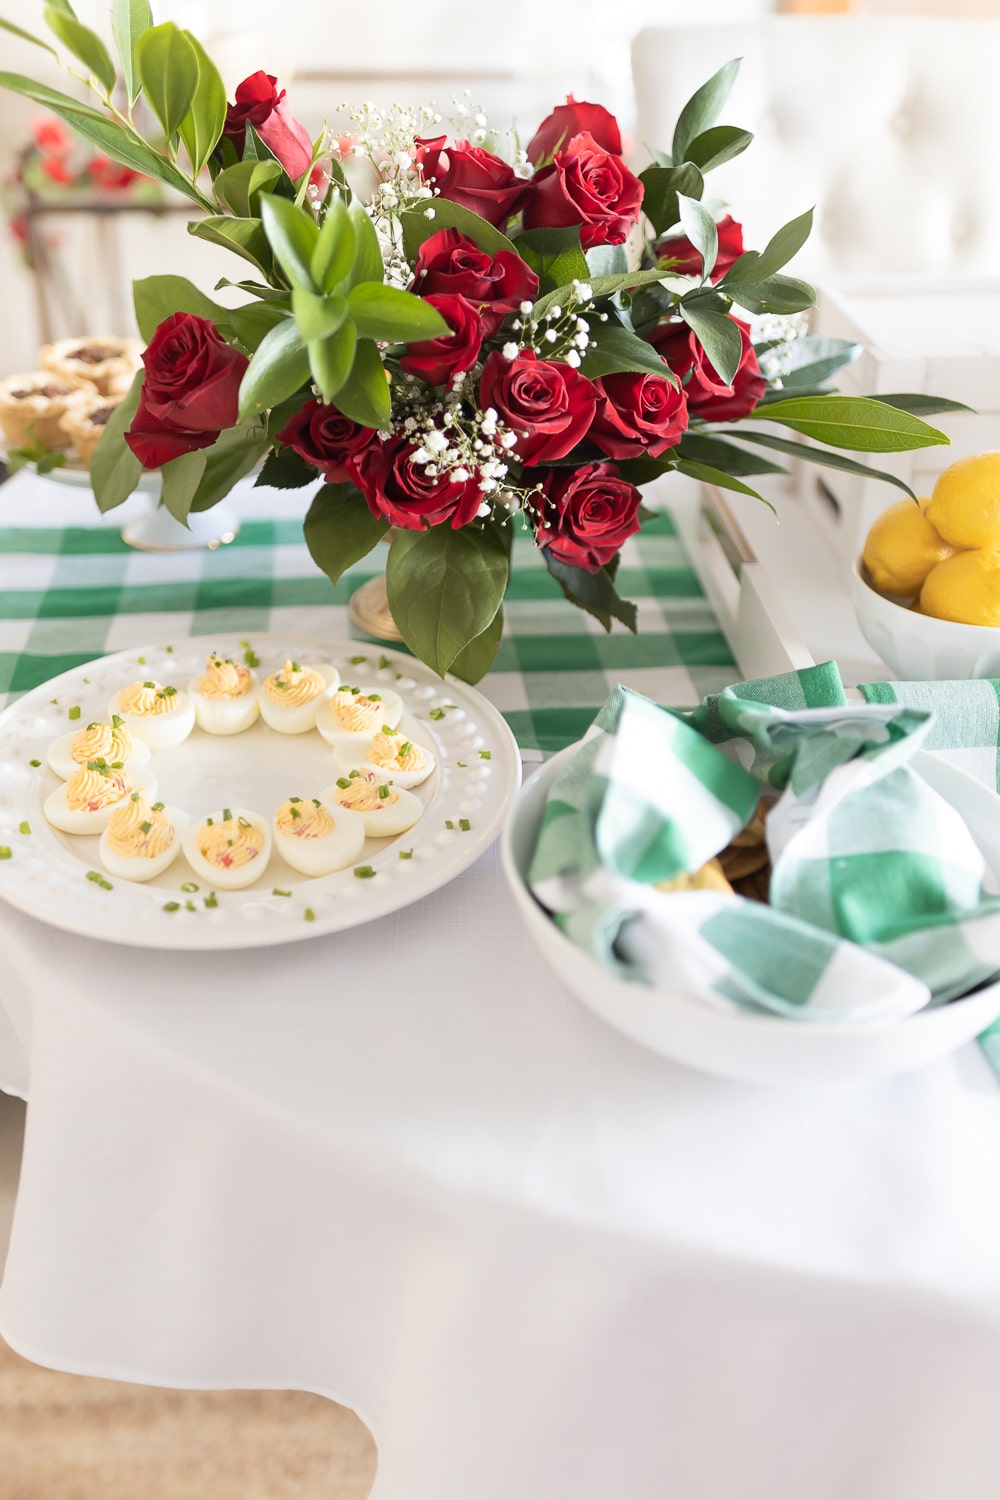 Red rose Kentucky Derby party centerpiece designed by southern blogger Stephanie Ziajka on Diary of a Debutante